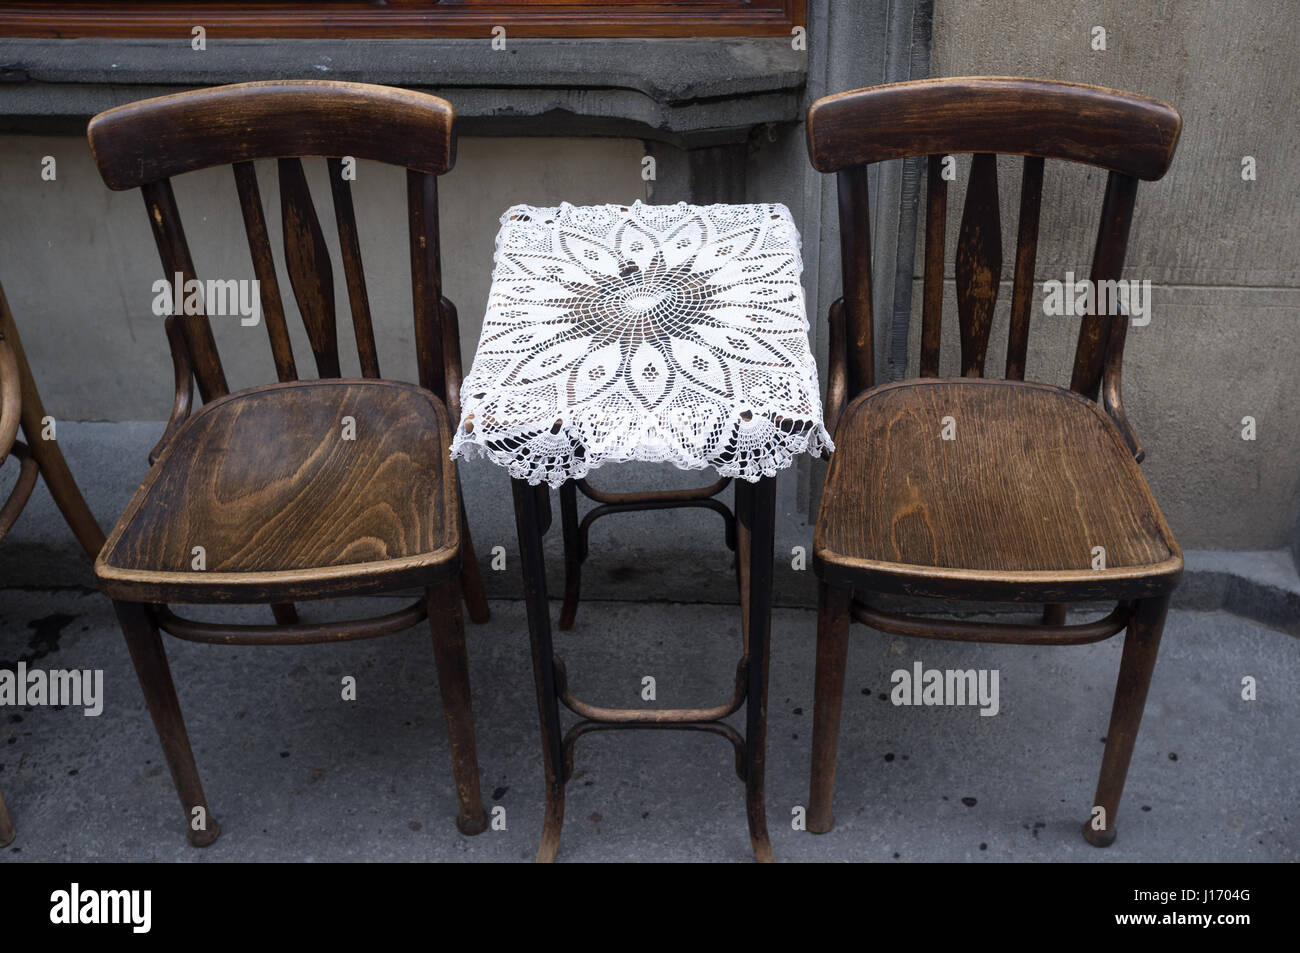 Lace tablecloth on street table, Budapest Hungary Stock Photo